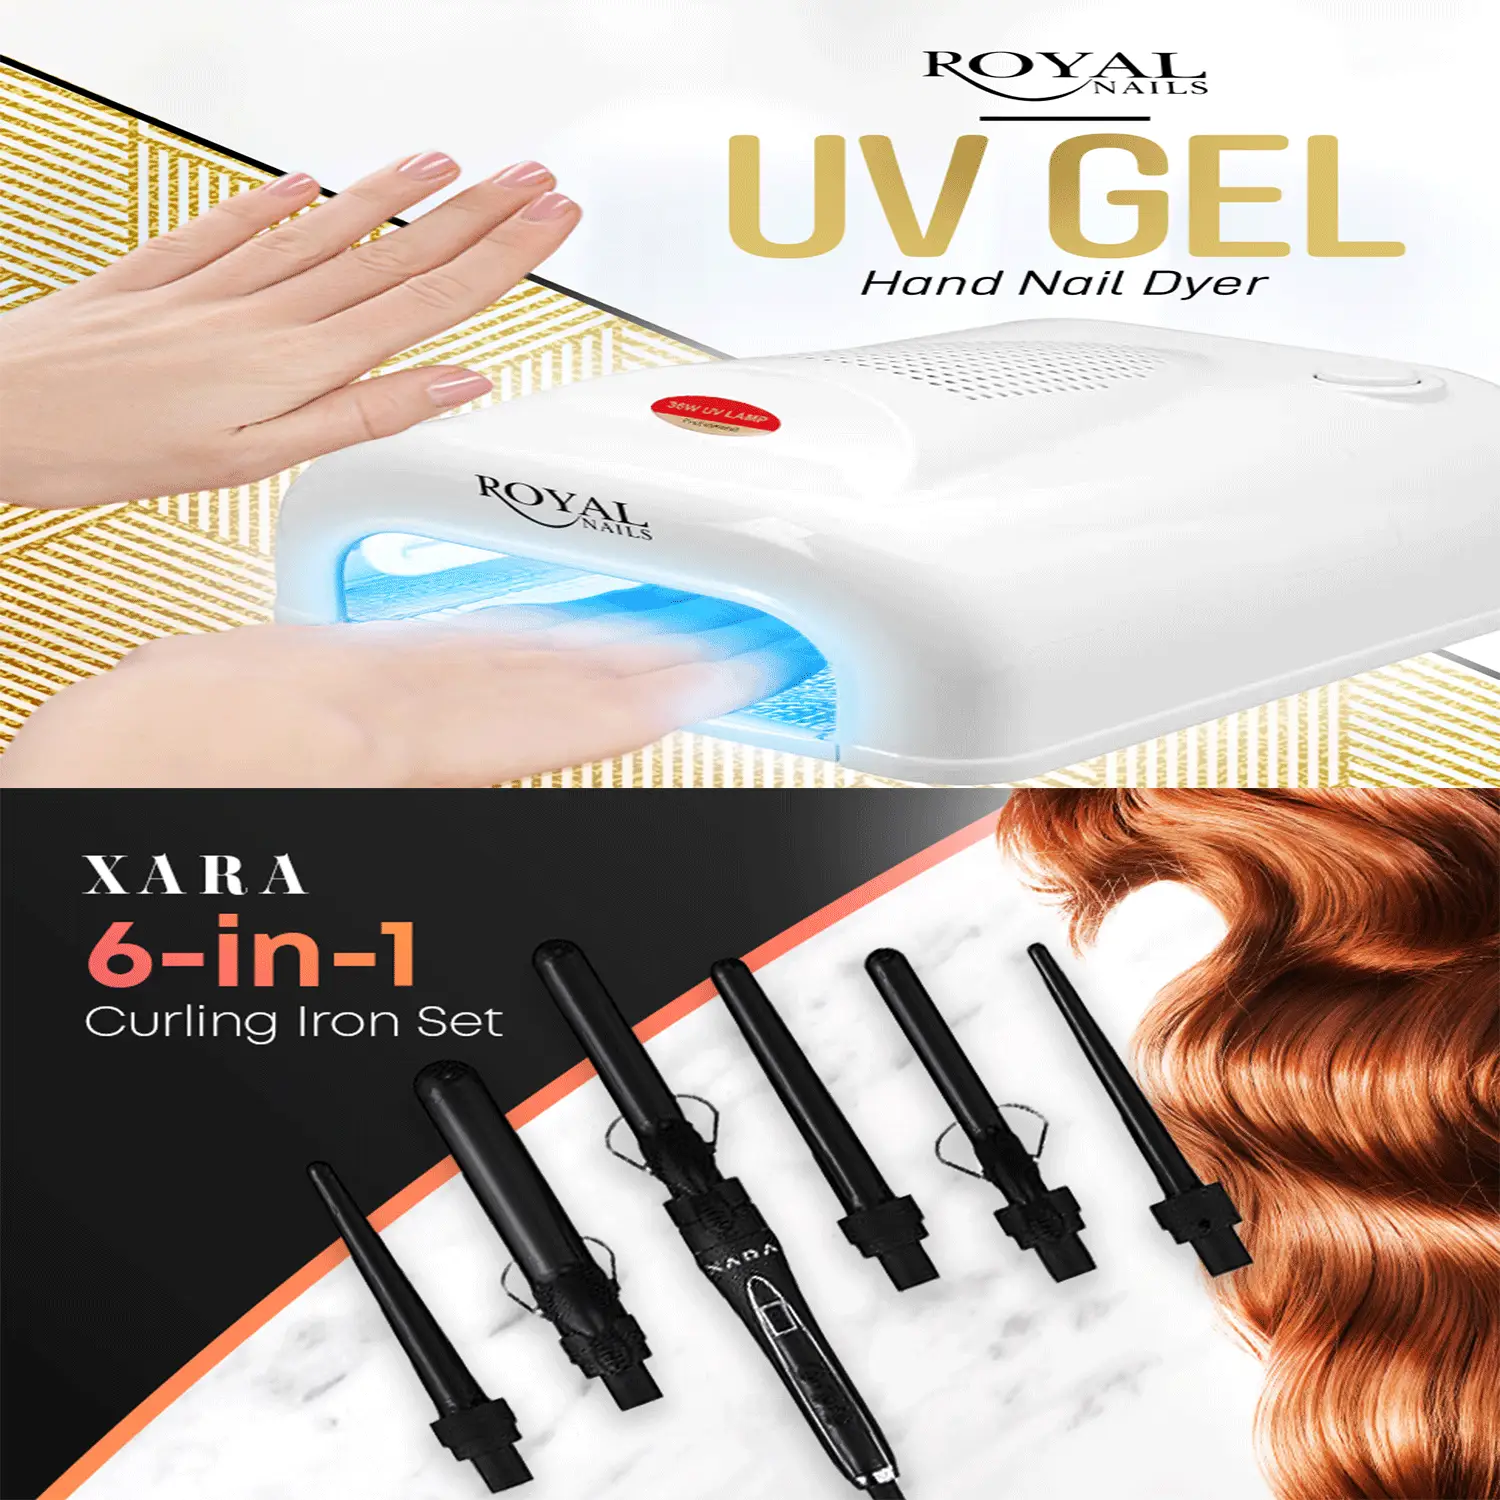 Gel UV Light Nail Dryer and Professional Curling Iron Set